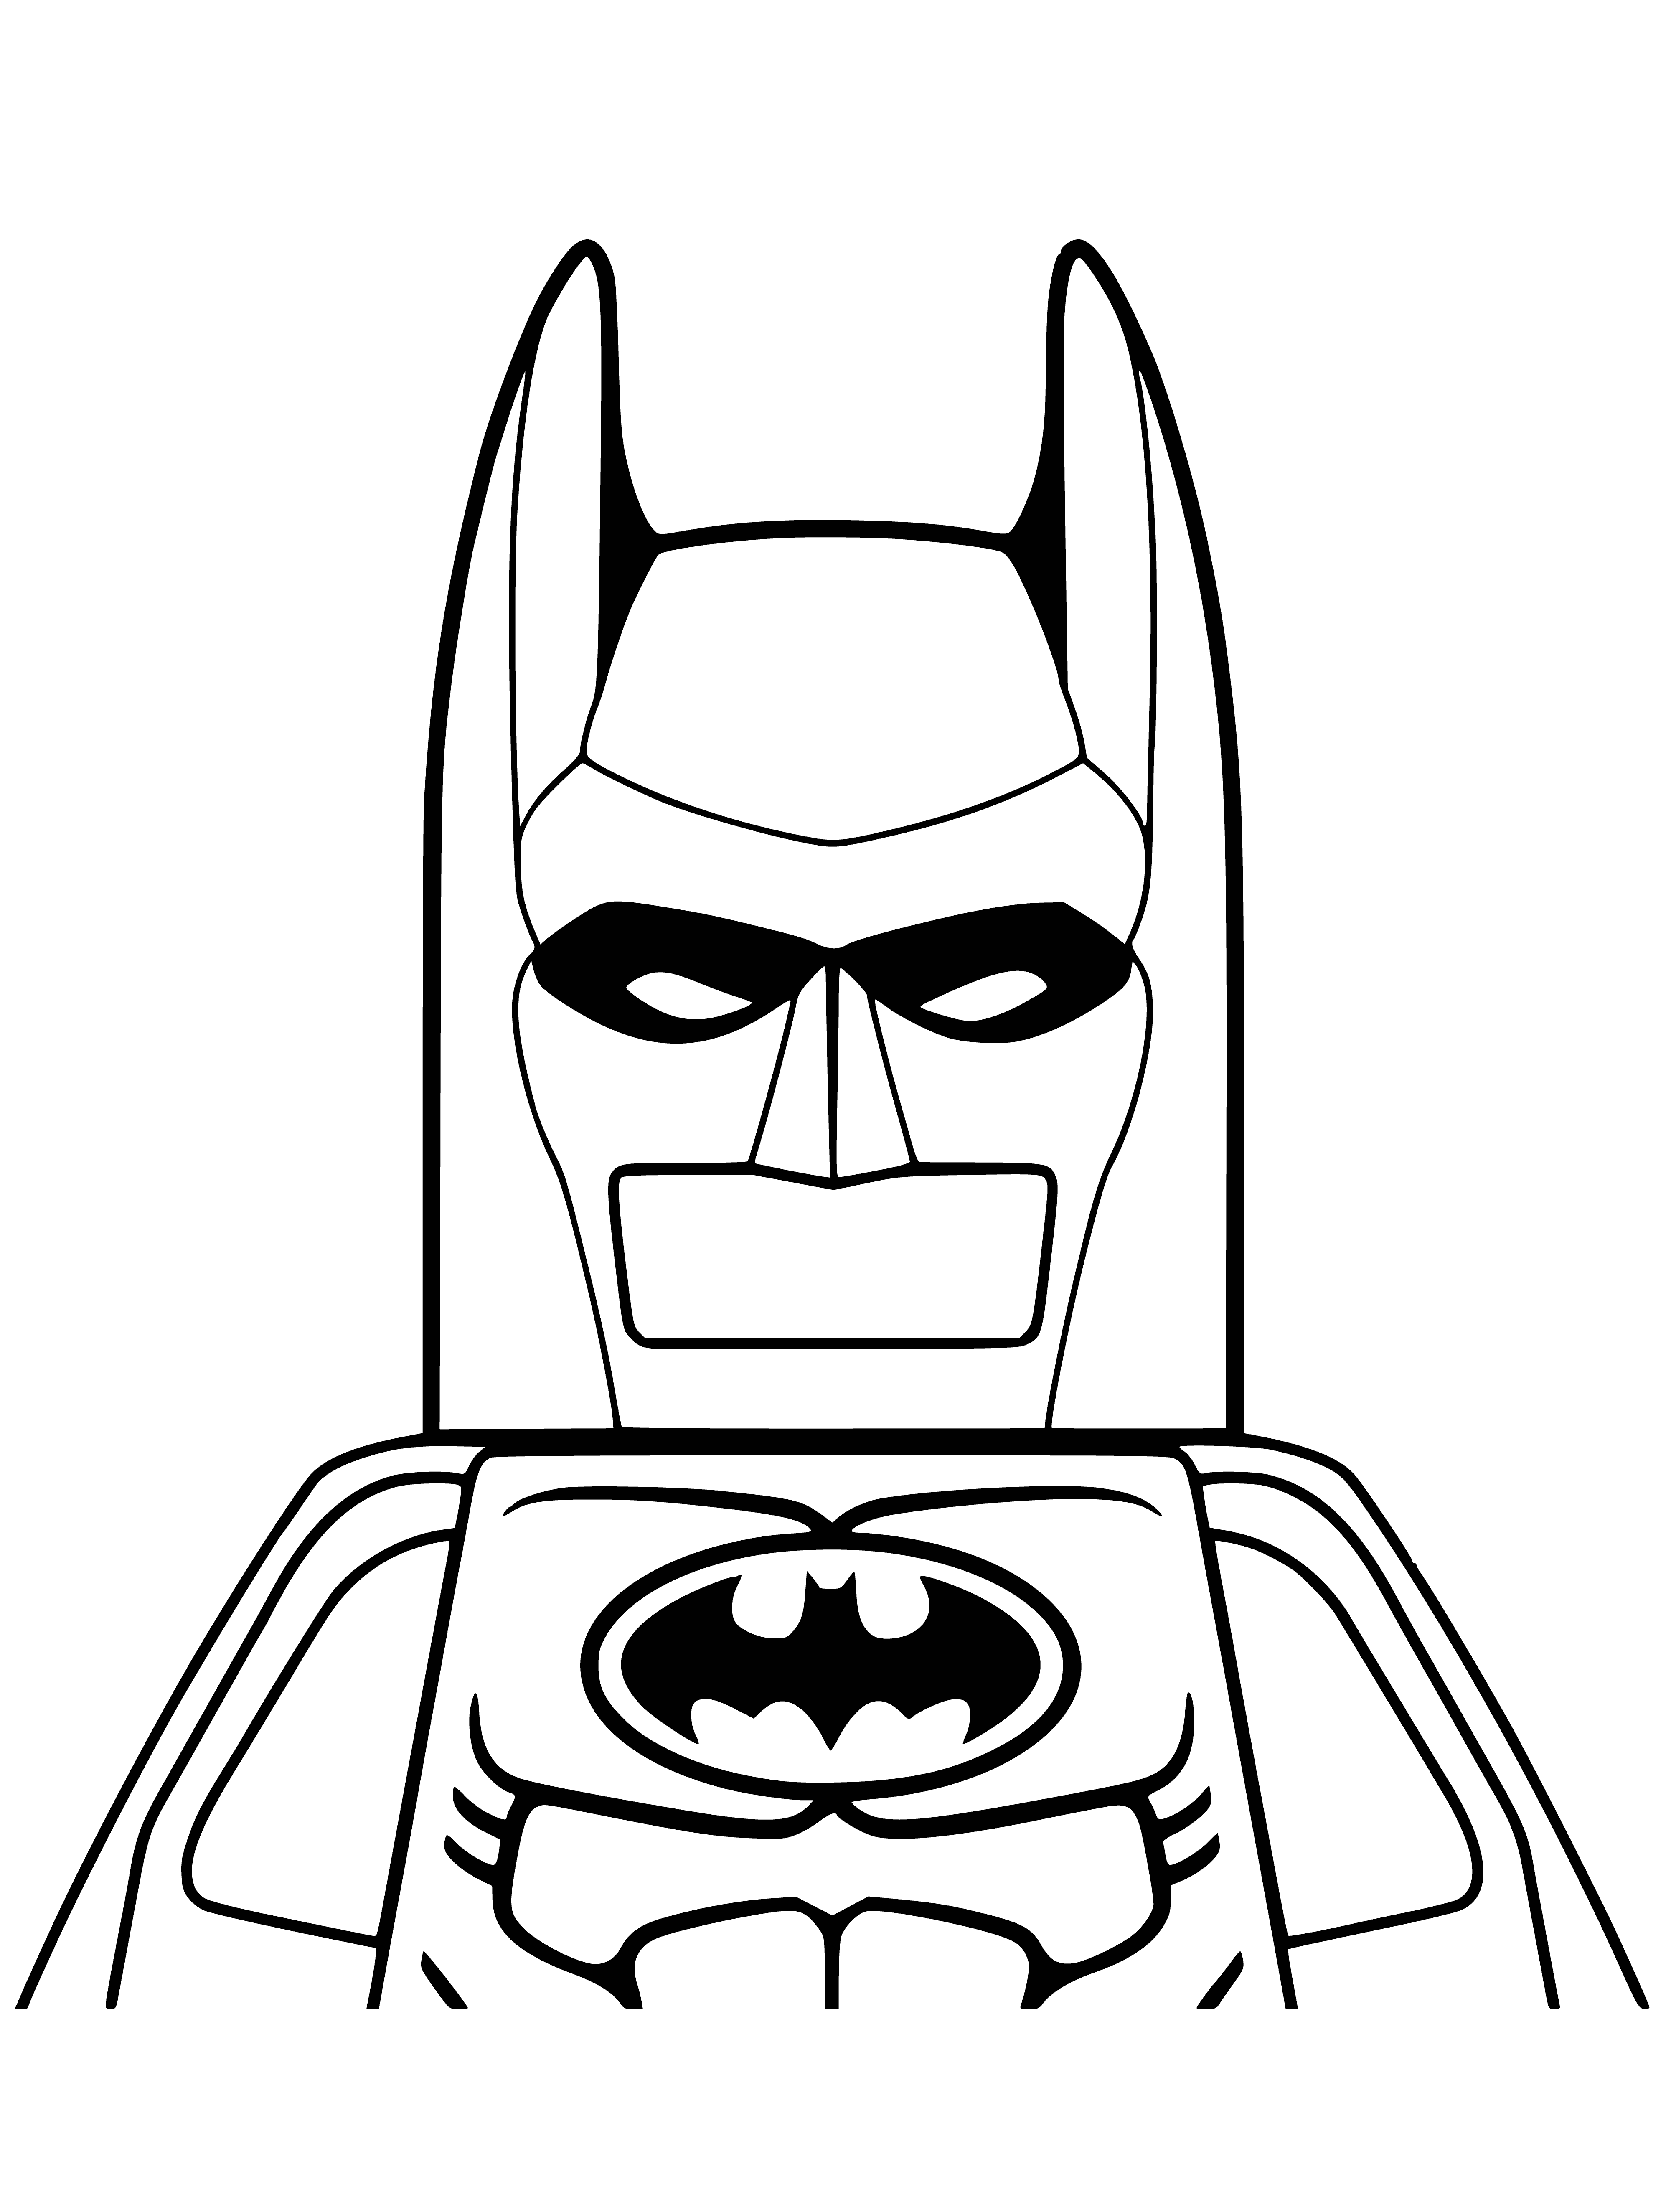 coloring page: Batman LEGO figure reaching out w/ batarang; cape blowing in wind & cityscape behind him in sunset.